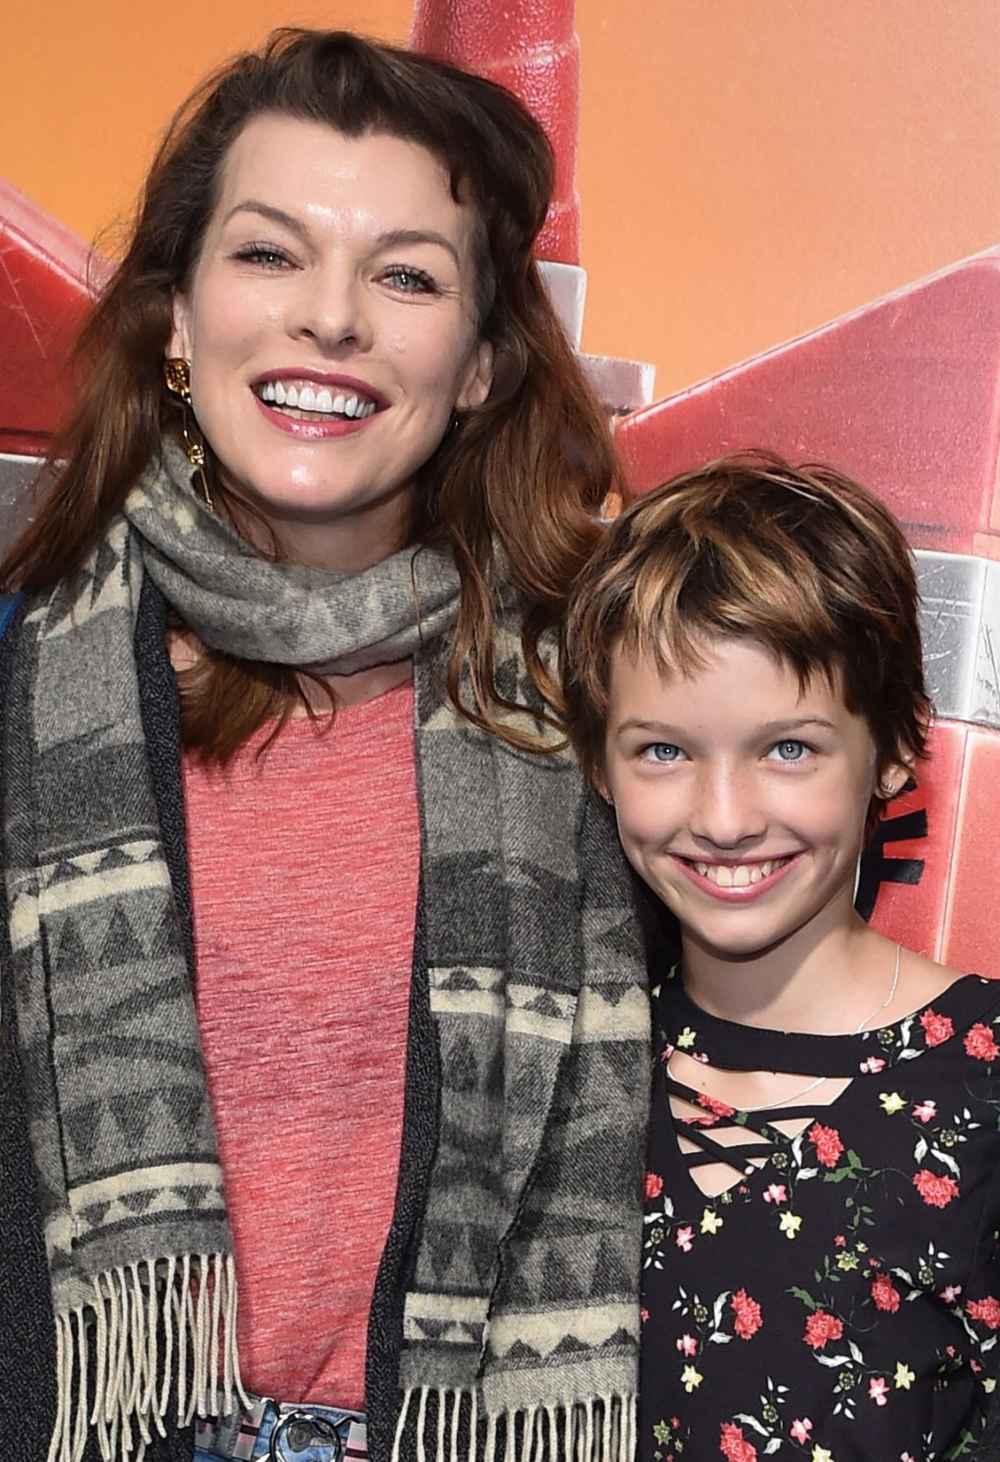 Milla Jovovich Reveals How She Keeps Her Preteen Daughter From Feeling ‘Entitled’ to Their ‘Privileged Life’